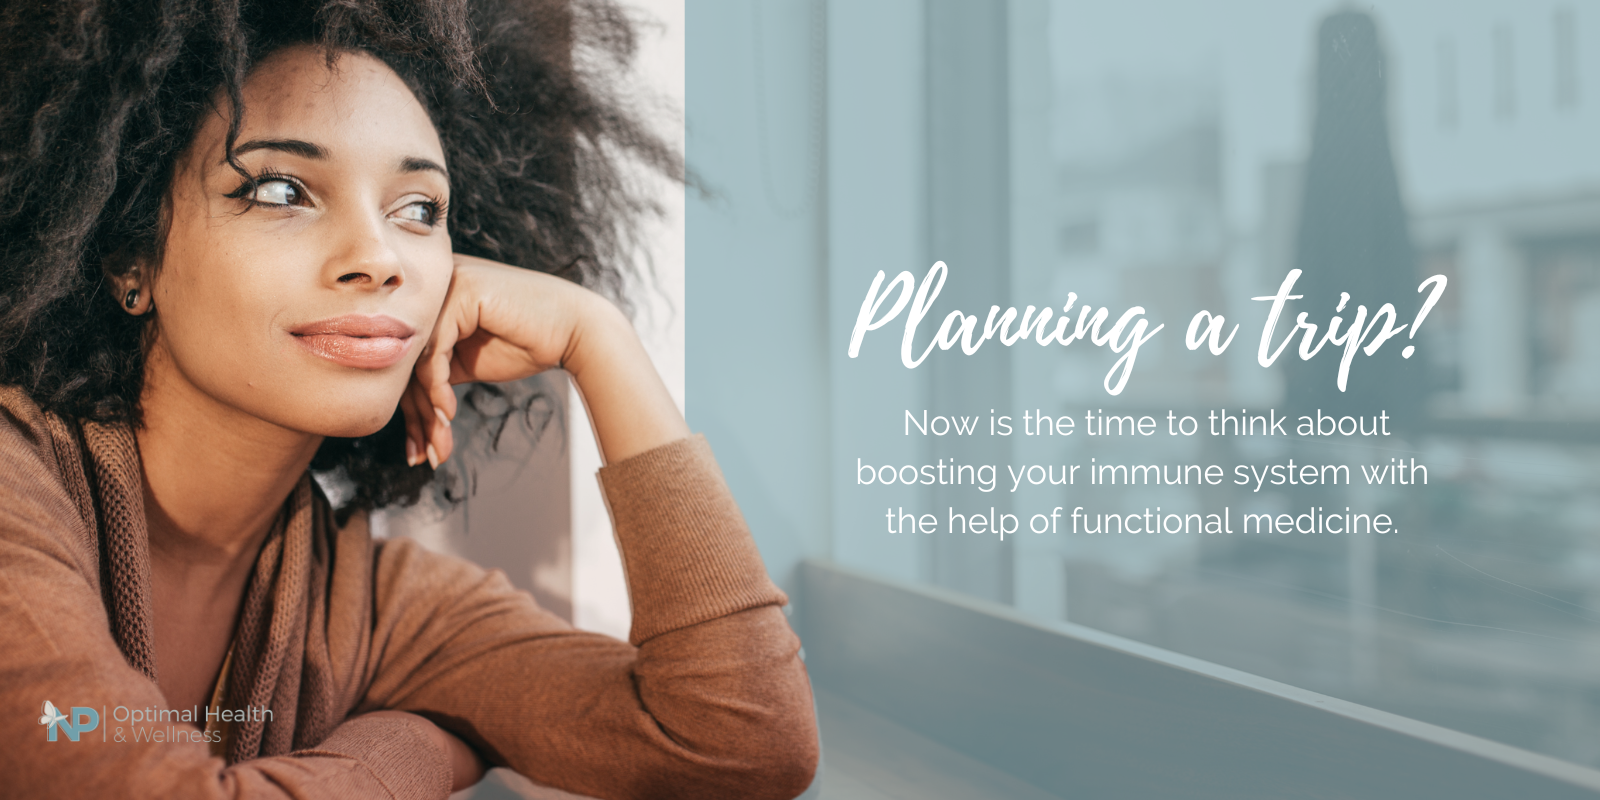 A woman leans on her arm looking out a window. She looks like she is day dreaming. Heading reads "Planning a trip? Now is the time to boost your immune system with functional medicine."